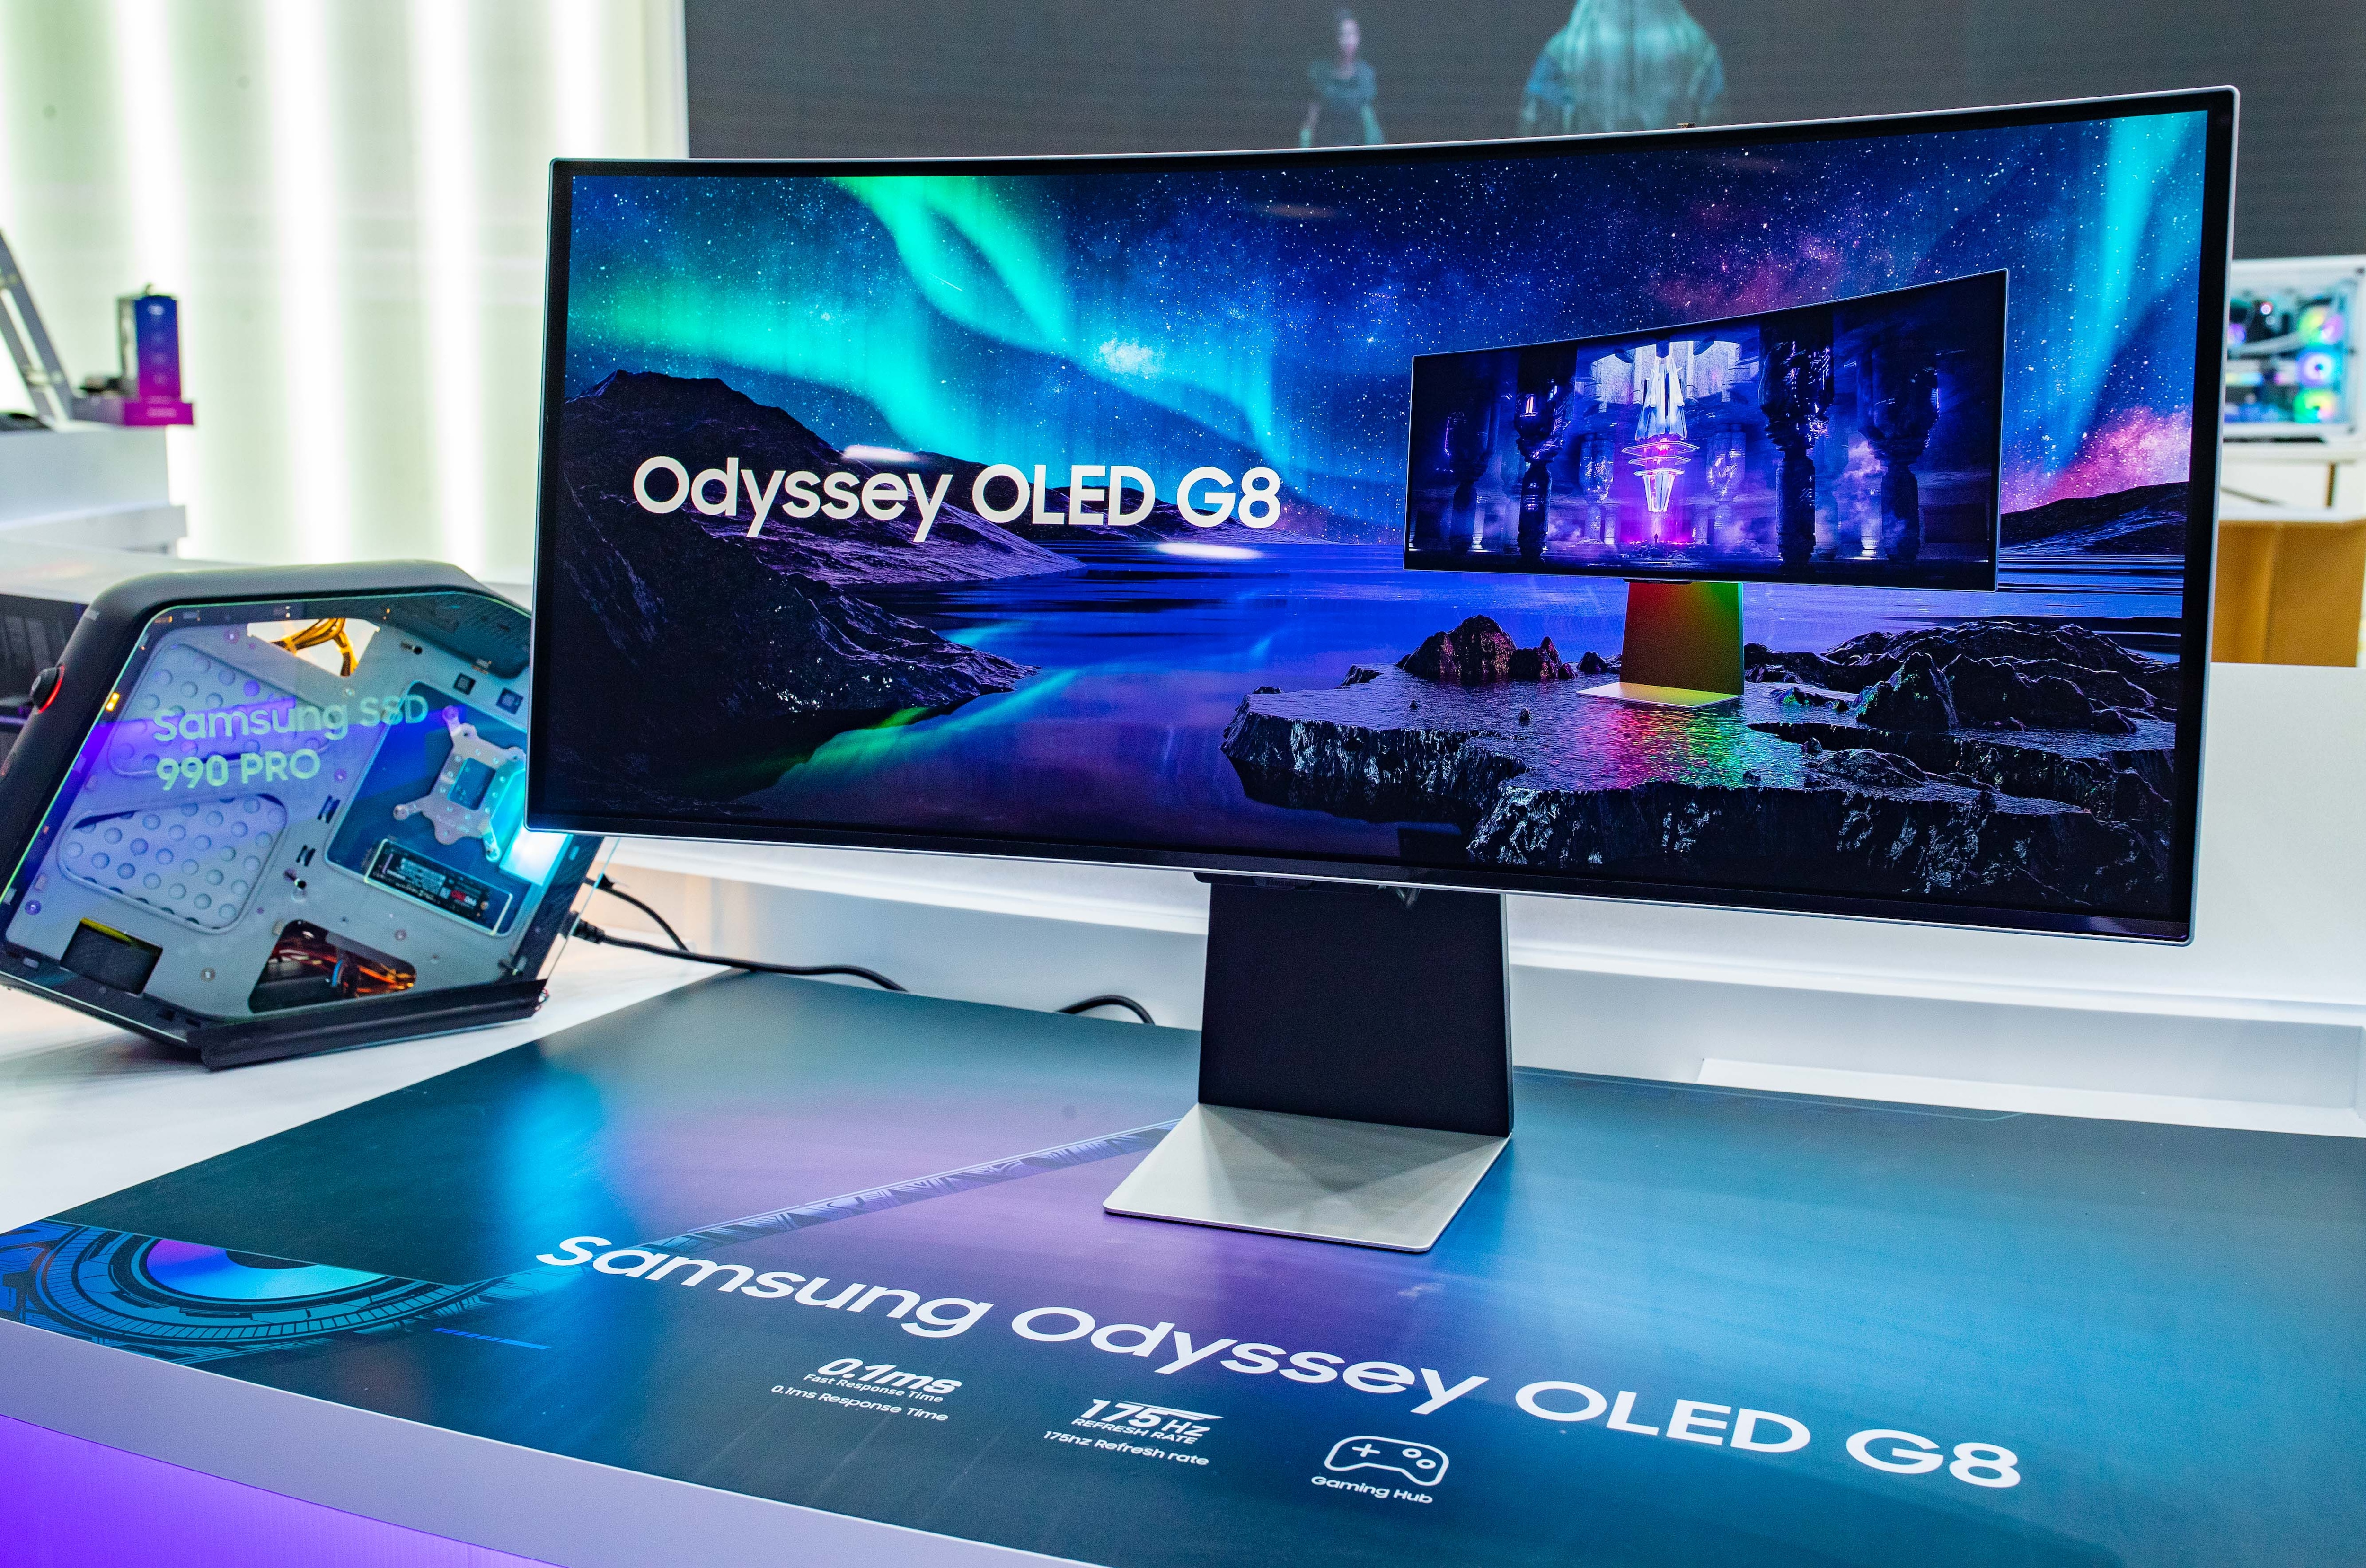 'Odyssey OLED G8' monitor with OLED panel of Samsung Electronics' Quantum Dot technology